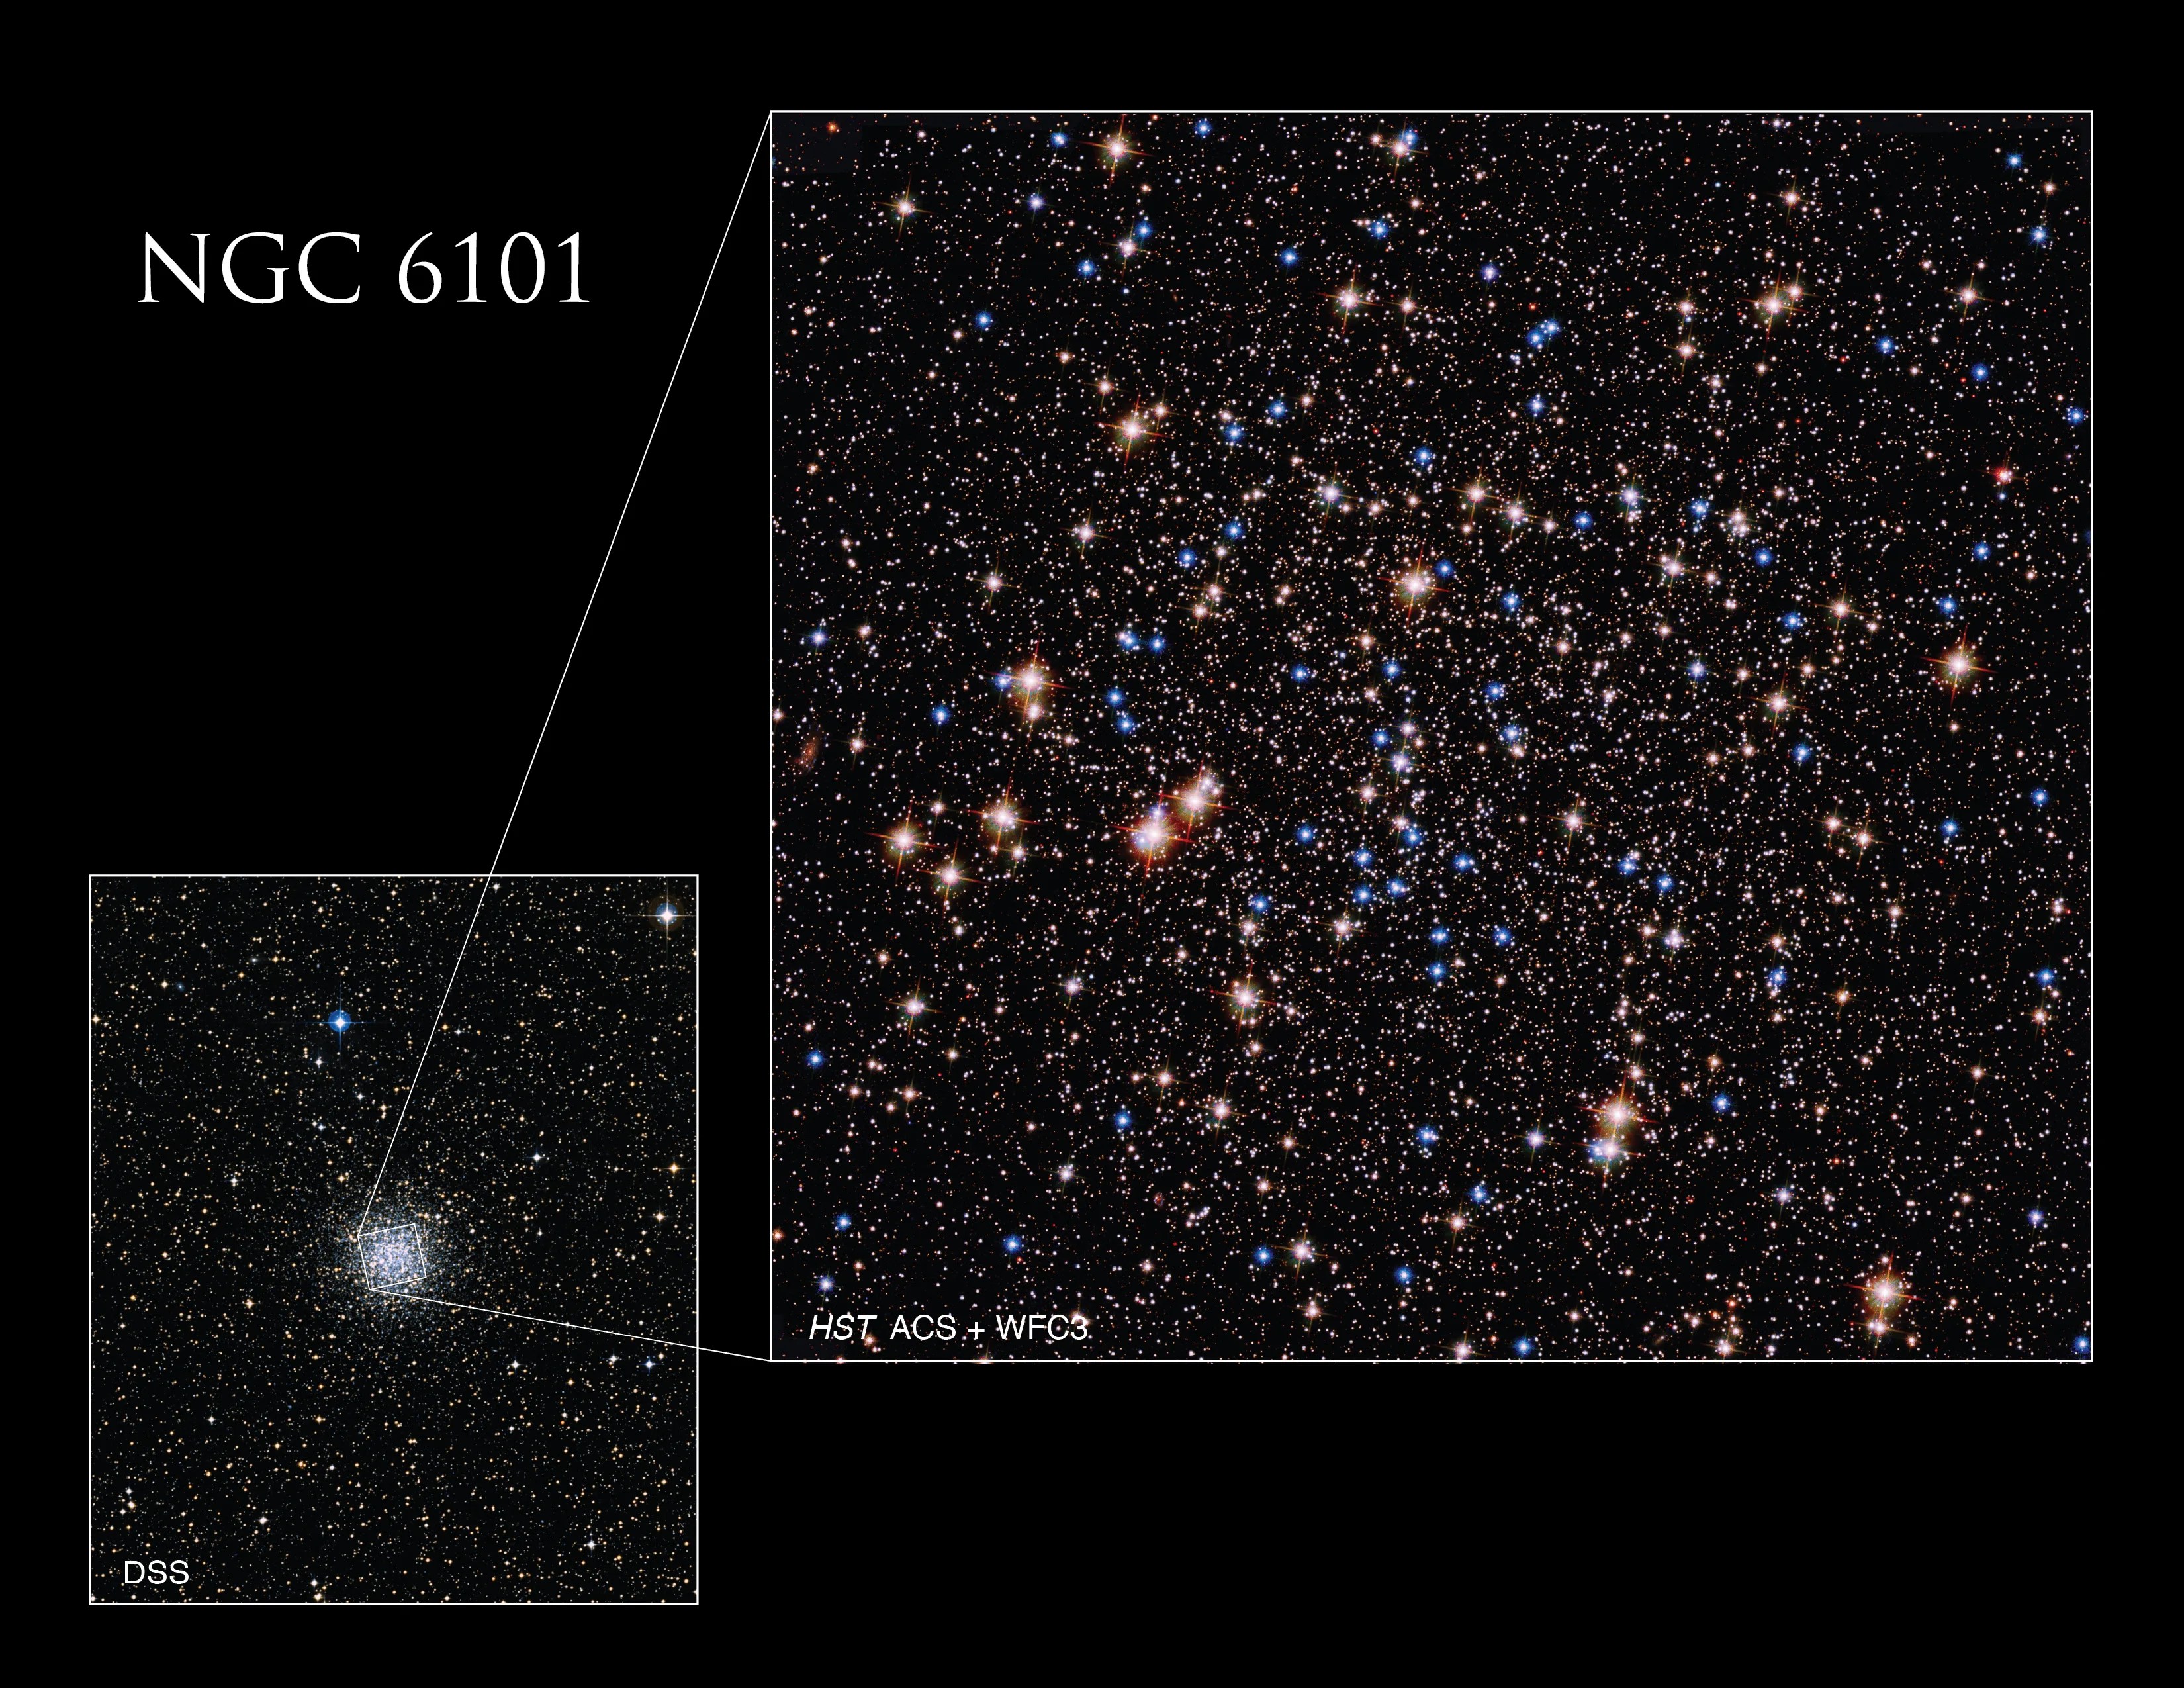 To the left is a ground-based image of spherical globular cluster Caldwell 107. A callout box to the right shows the Hubble image with its location in the cluster pinpointed.